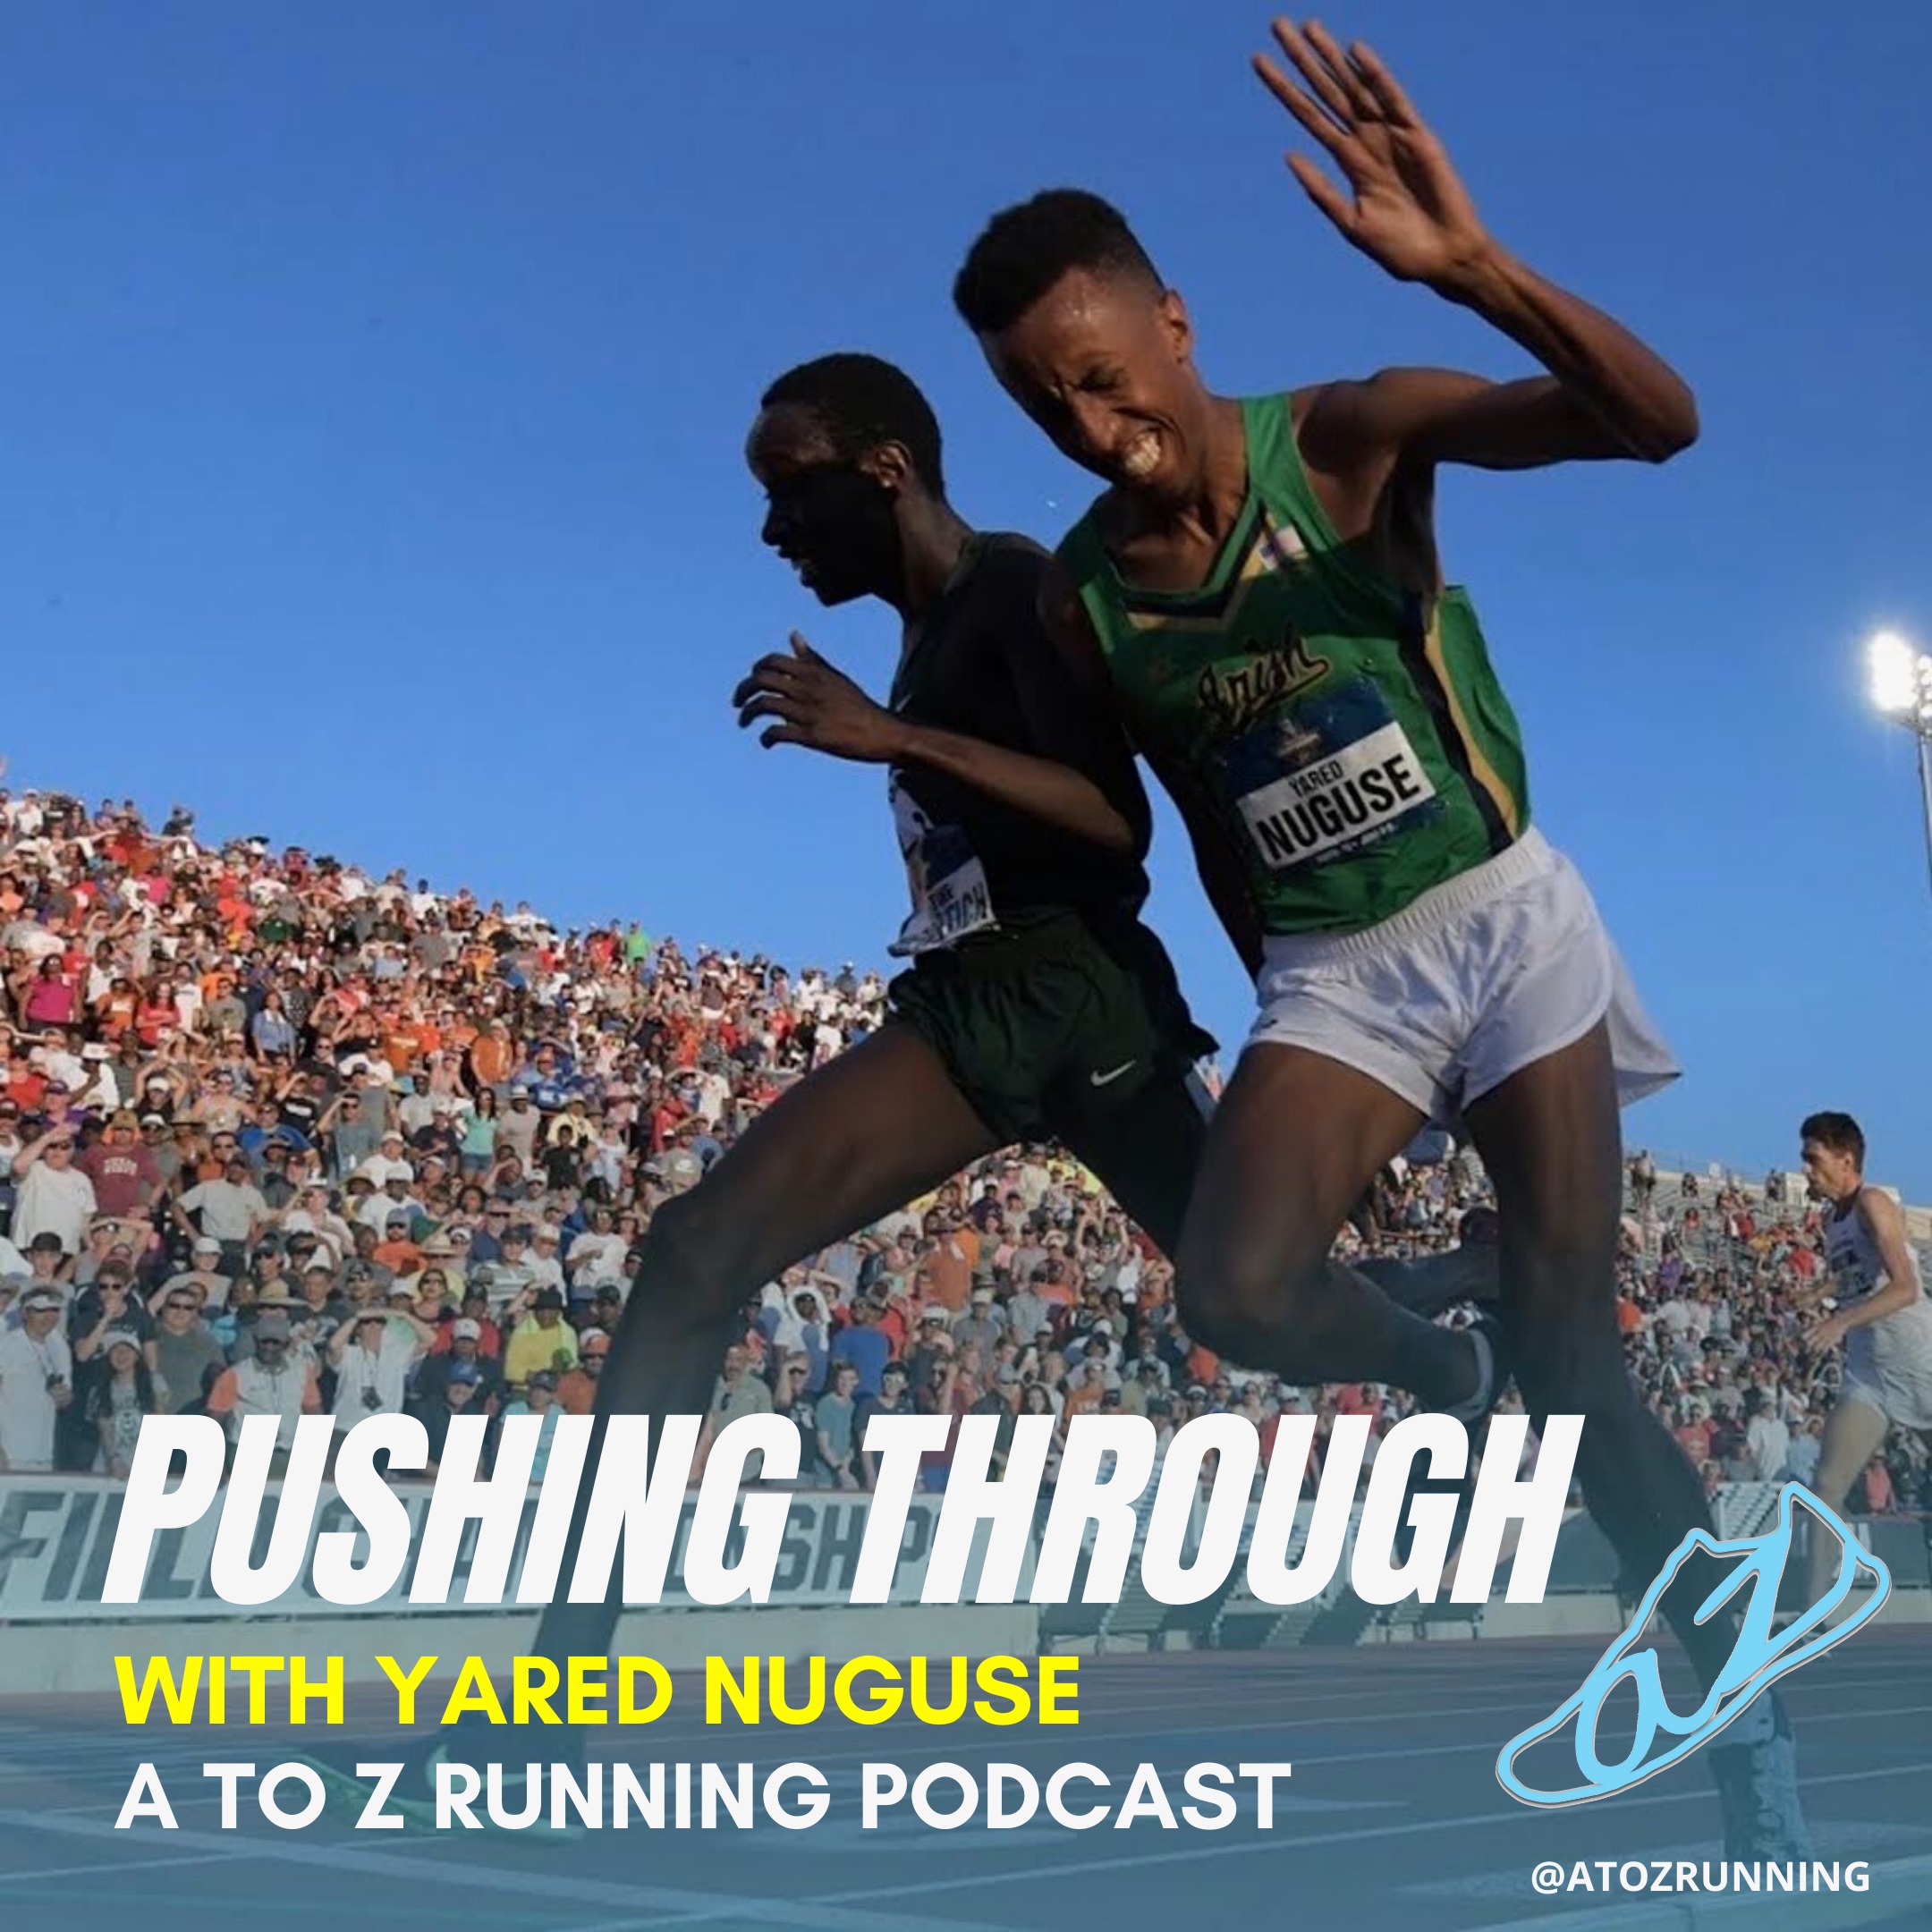 Yared Nuguse battles across the finish lin in track and field with the words "Pushing Through" with Yared Nuguse on the A to Z Running Podcast